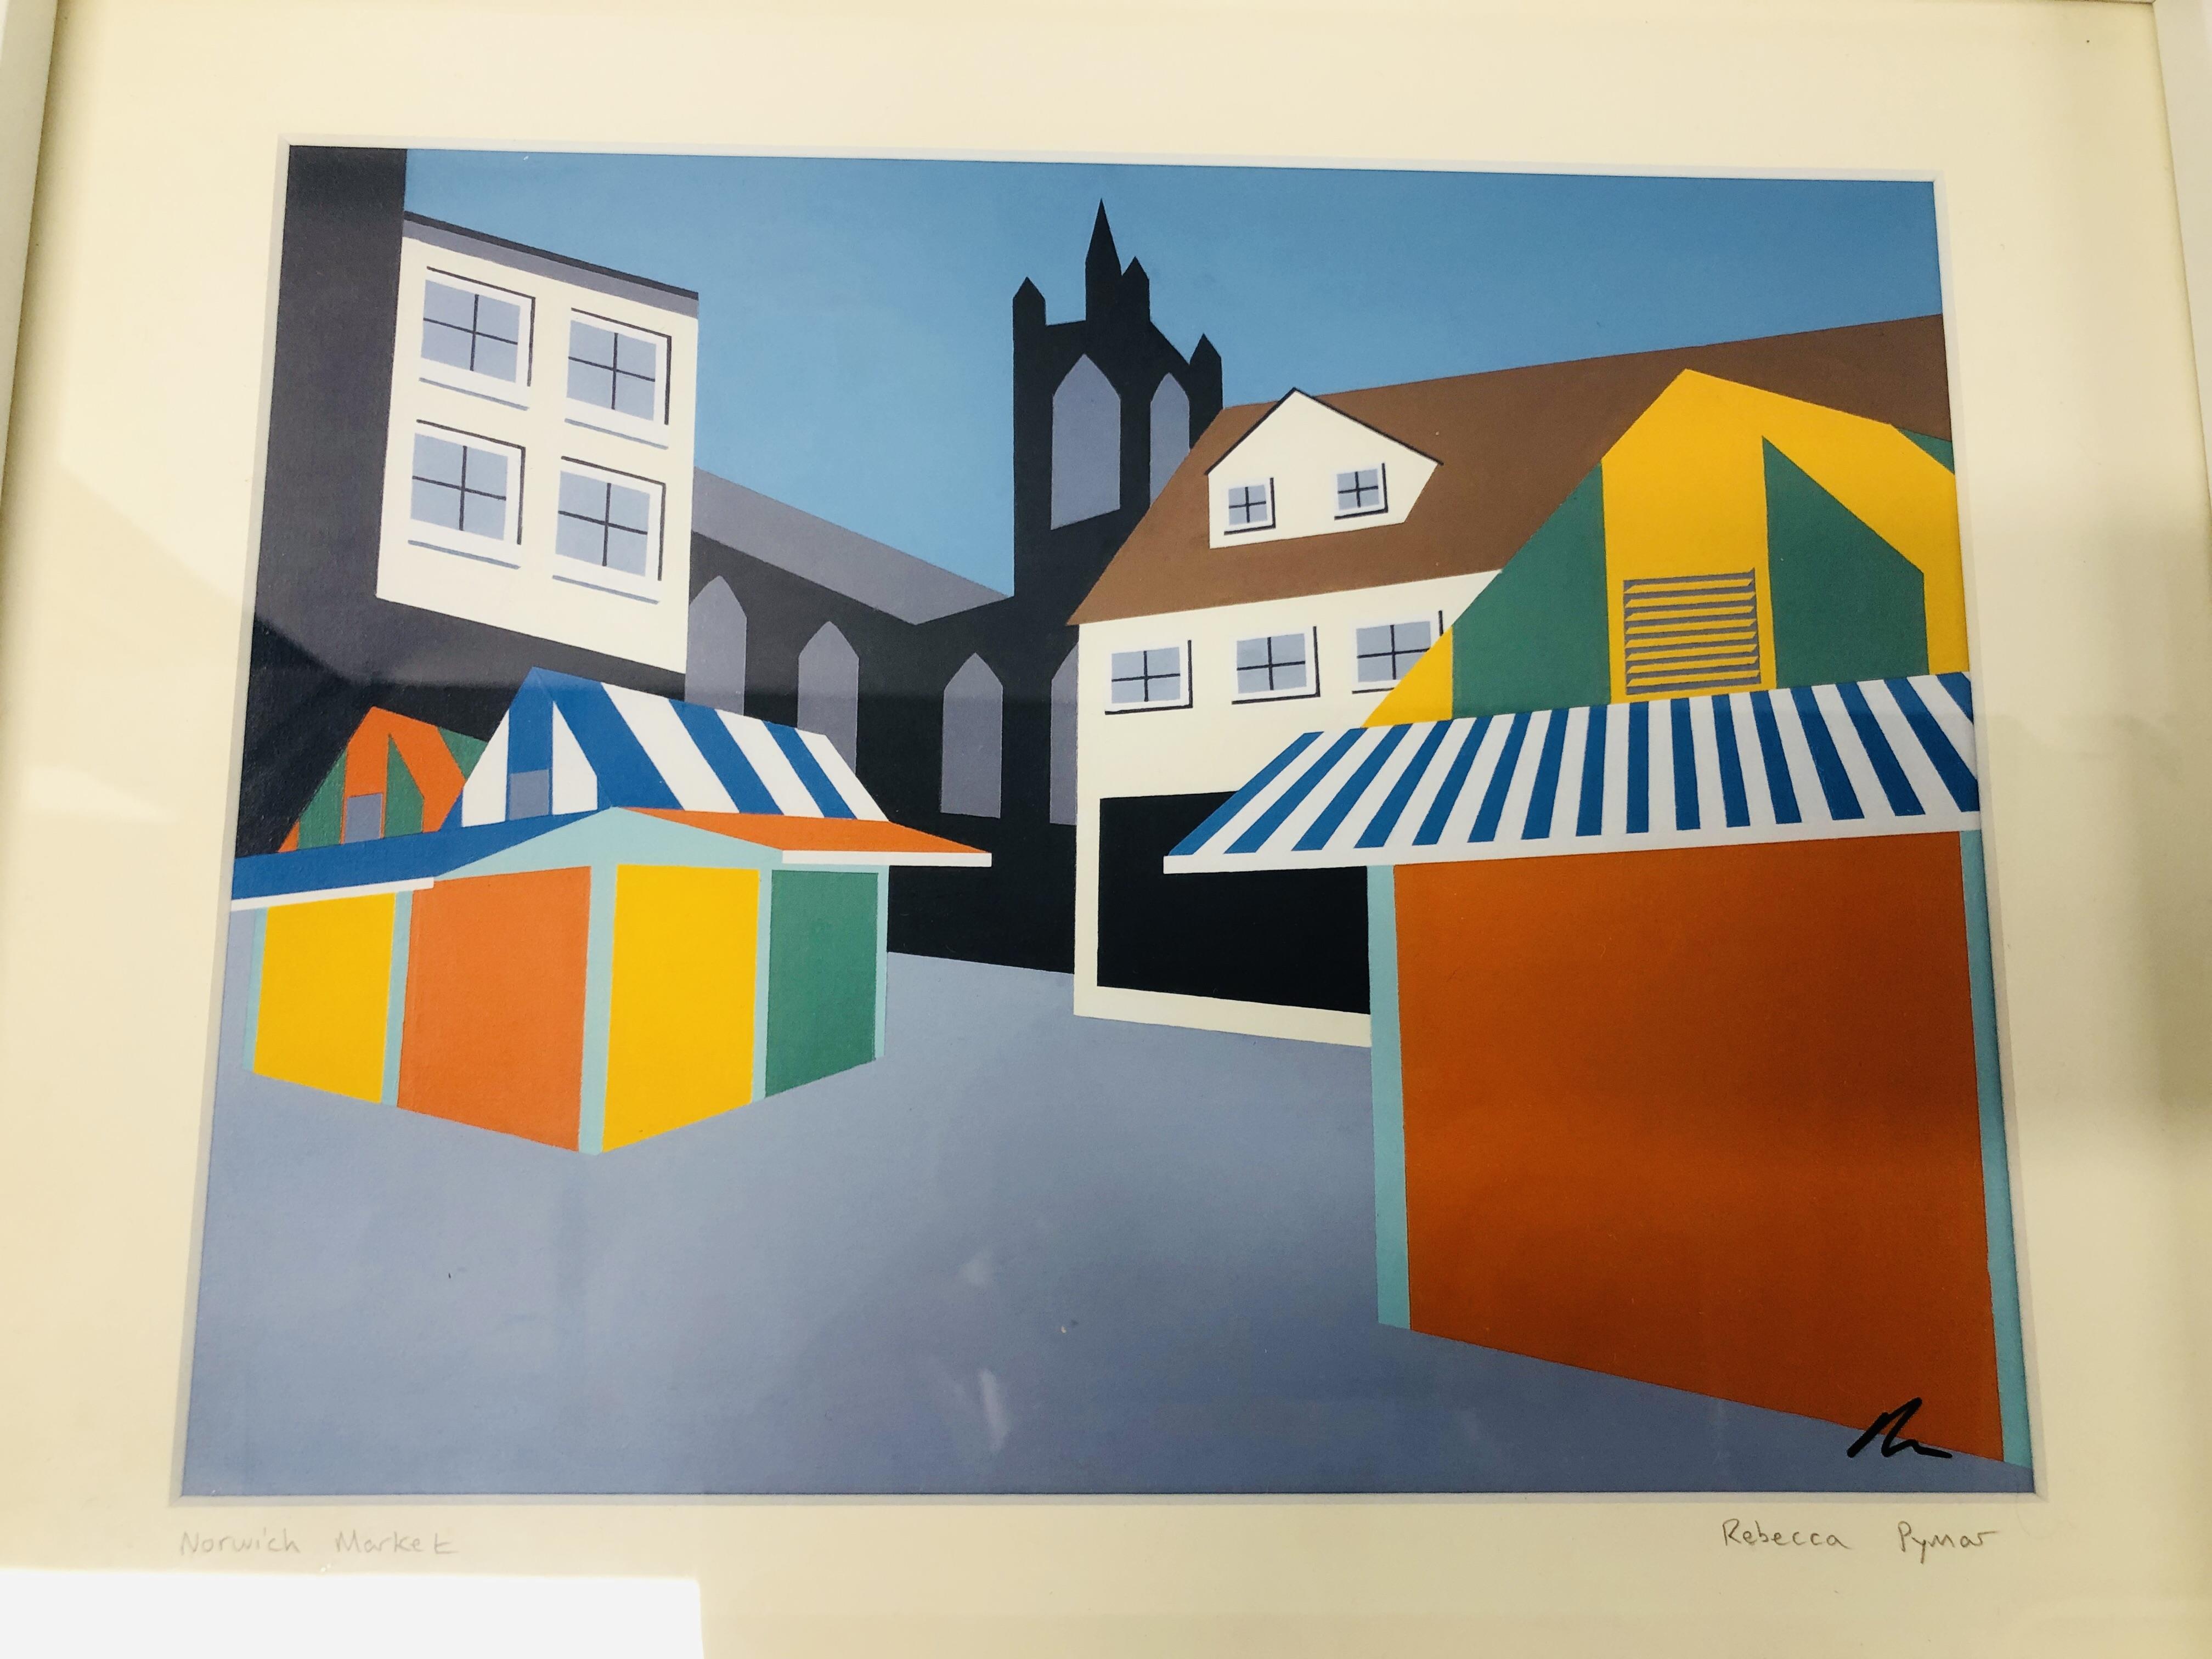 PAIR OF MODERN FRAMED PRINTS "WELLS BEACH HUTS" AND NORWICH MARKET BEARING PENCIL SIGNATURE REBECCA - Image 2 of 3